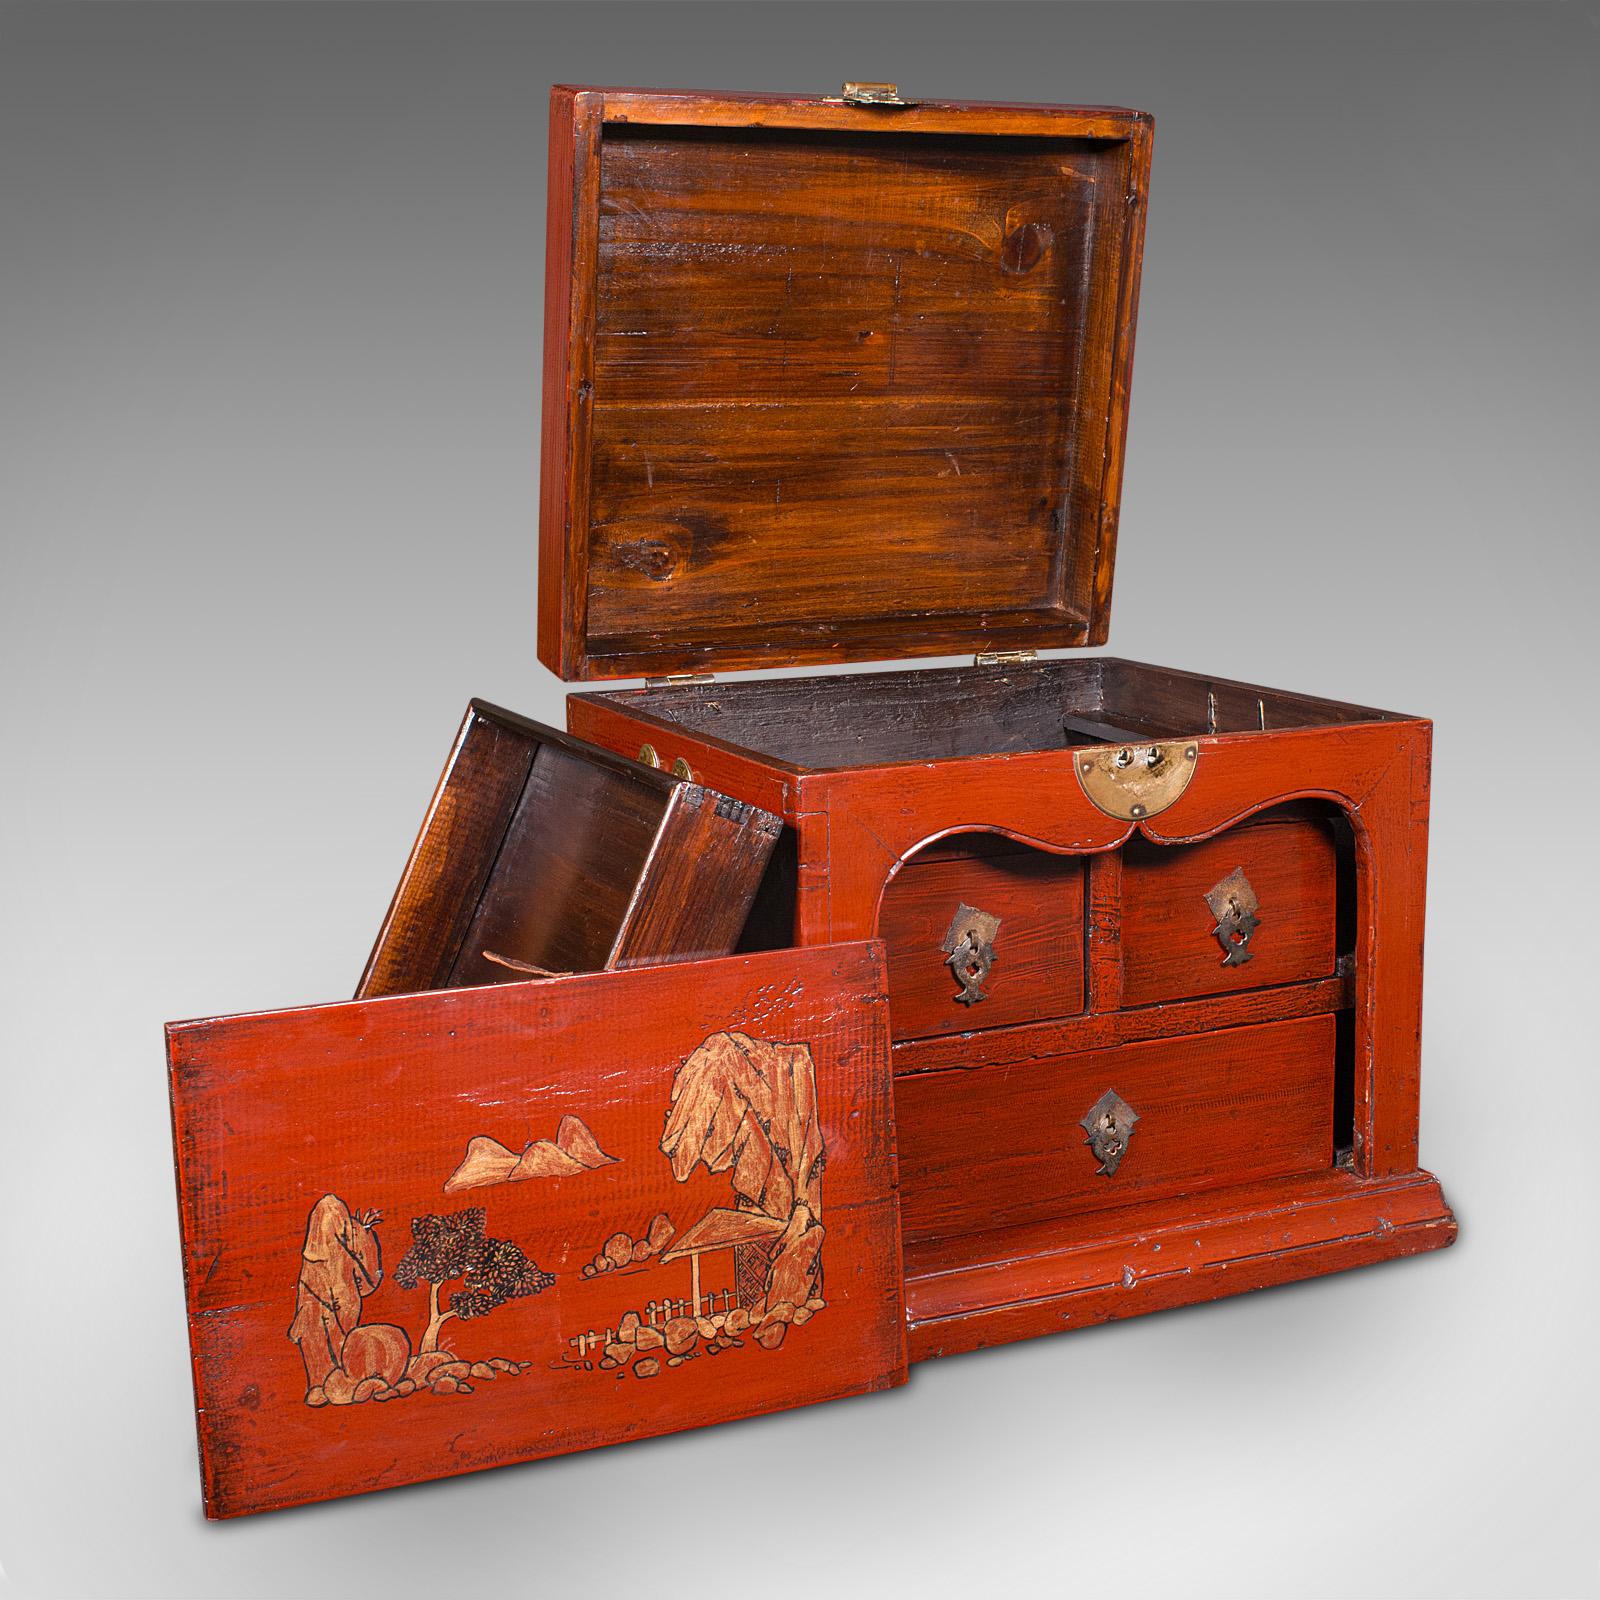 This is an antique travelling jewellery box. A Chinese, lacquered pine campaign case, dating to the late Victorian period, circa 1900.

Delightful example of red lacquered craftsmanship
Displaying a desirable aged patina and in good original